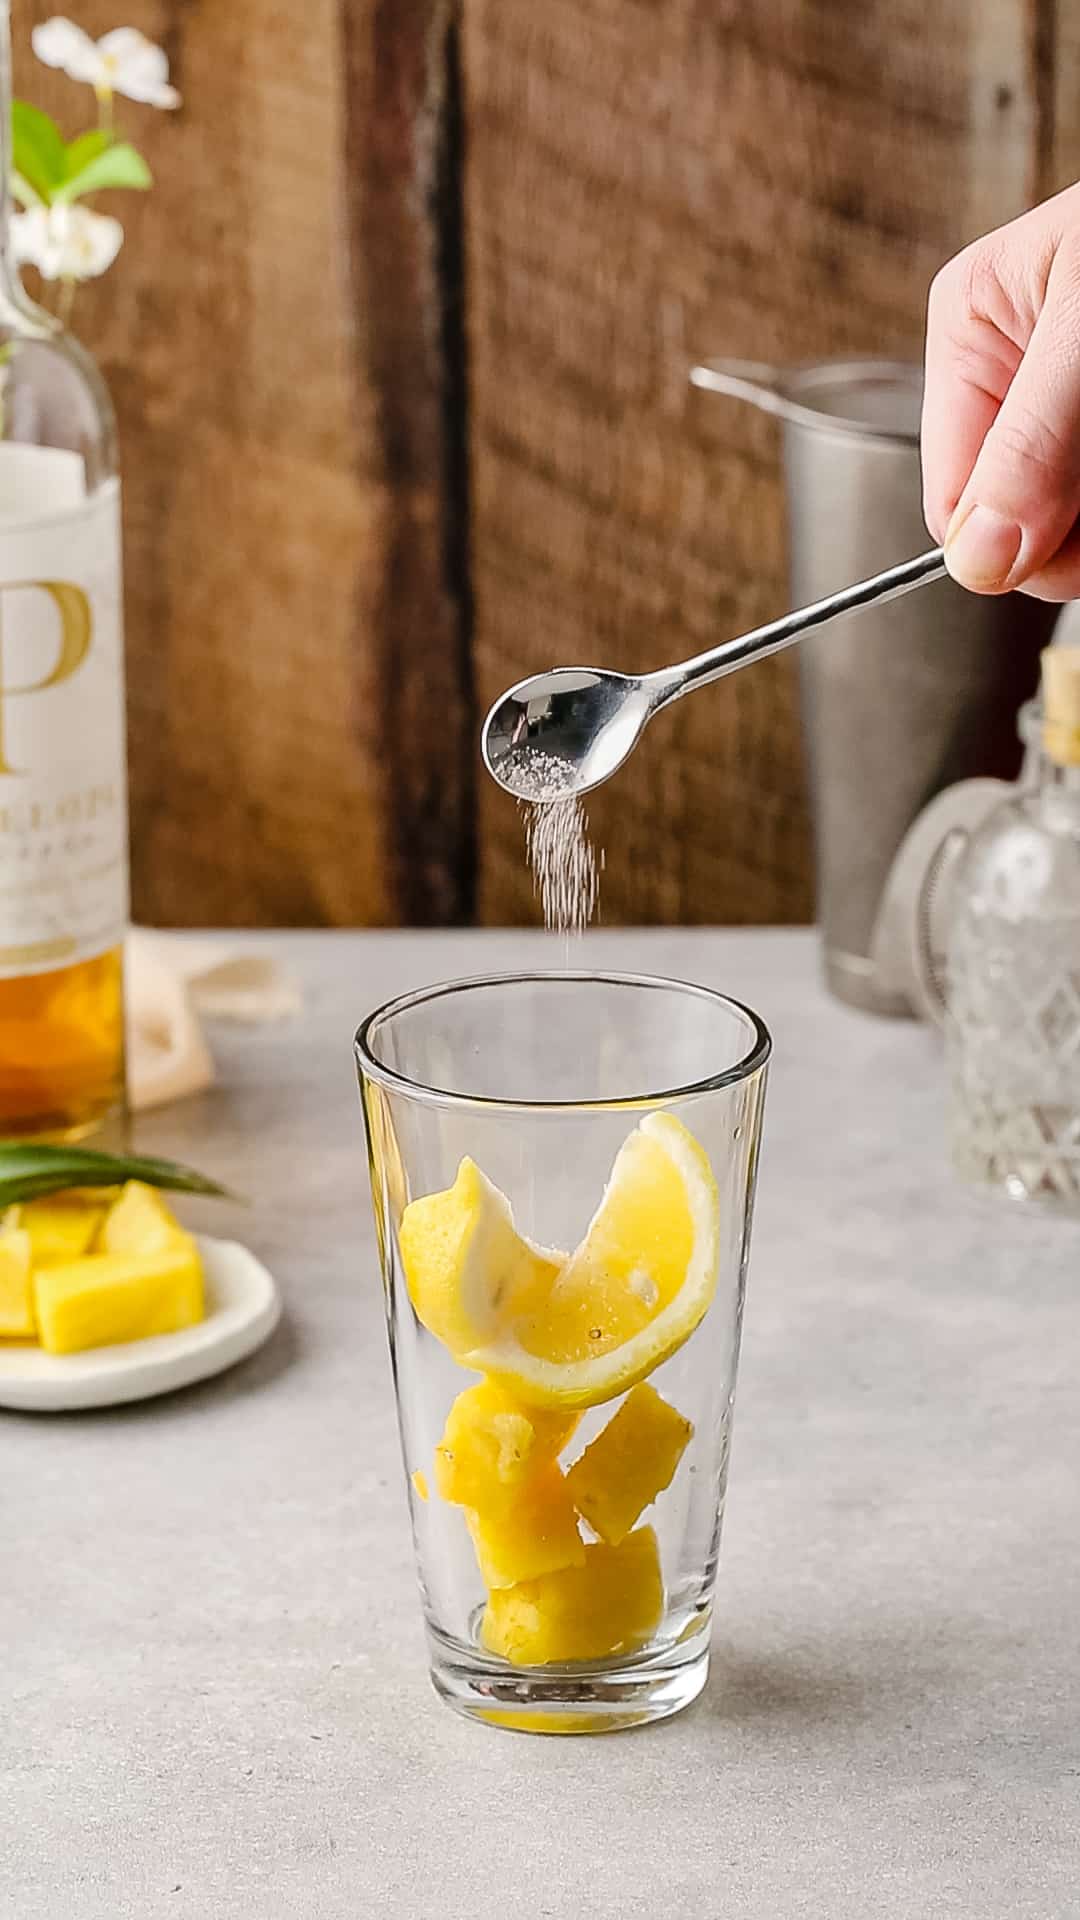 Adding a small amount of salt to the fruit in a cocktail shaker.